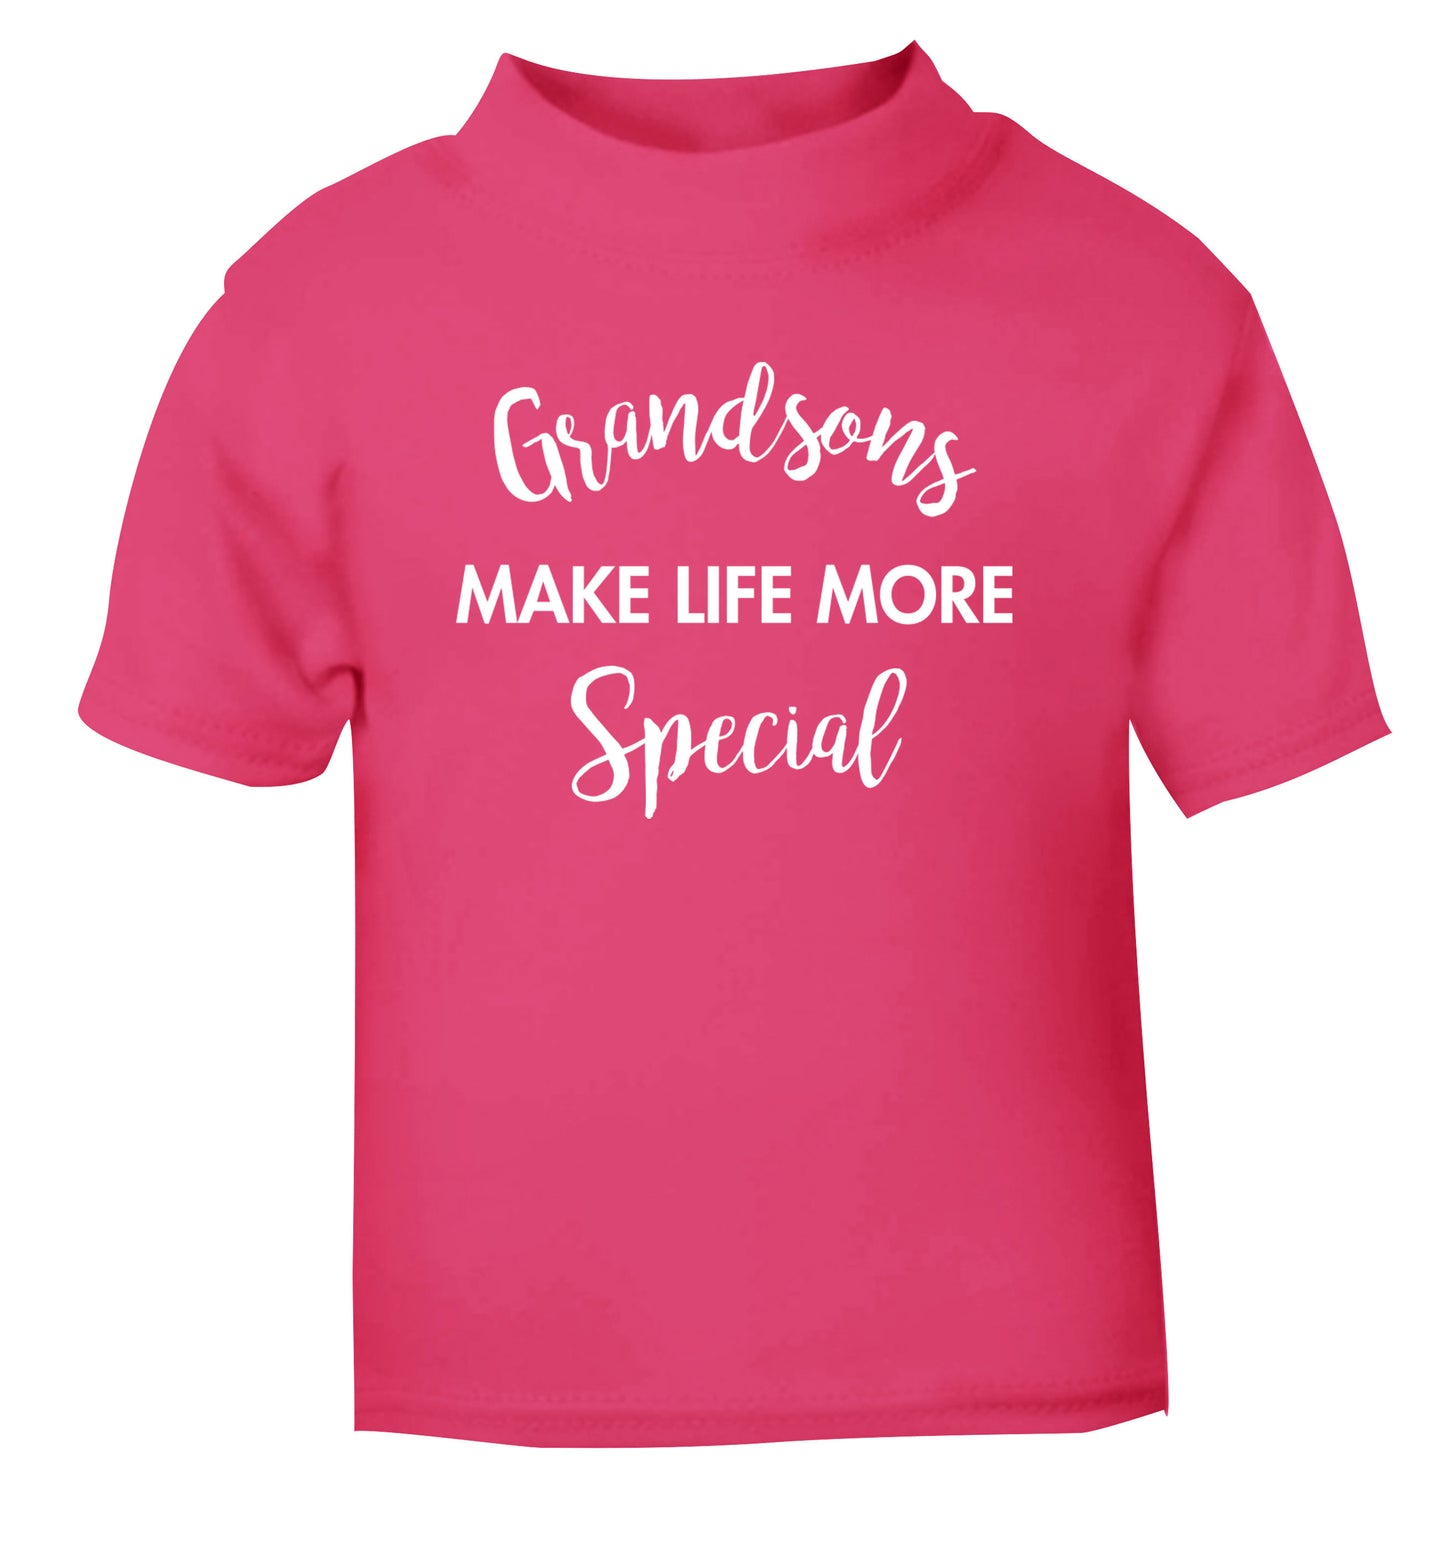 Grandsons make life more special pink Baby Toddler Tshirt 2 Years